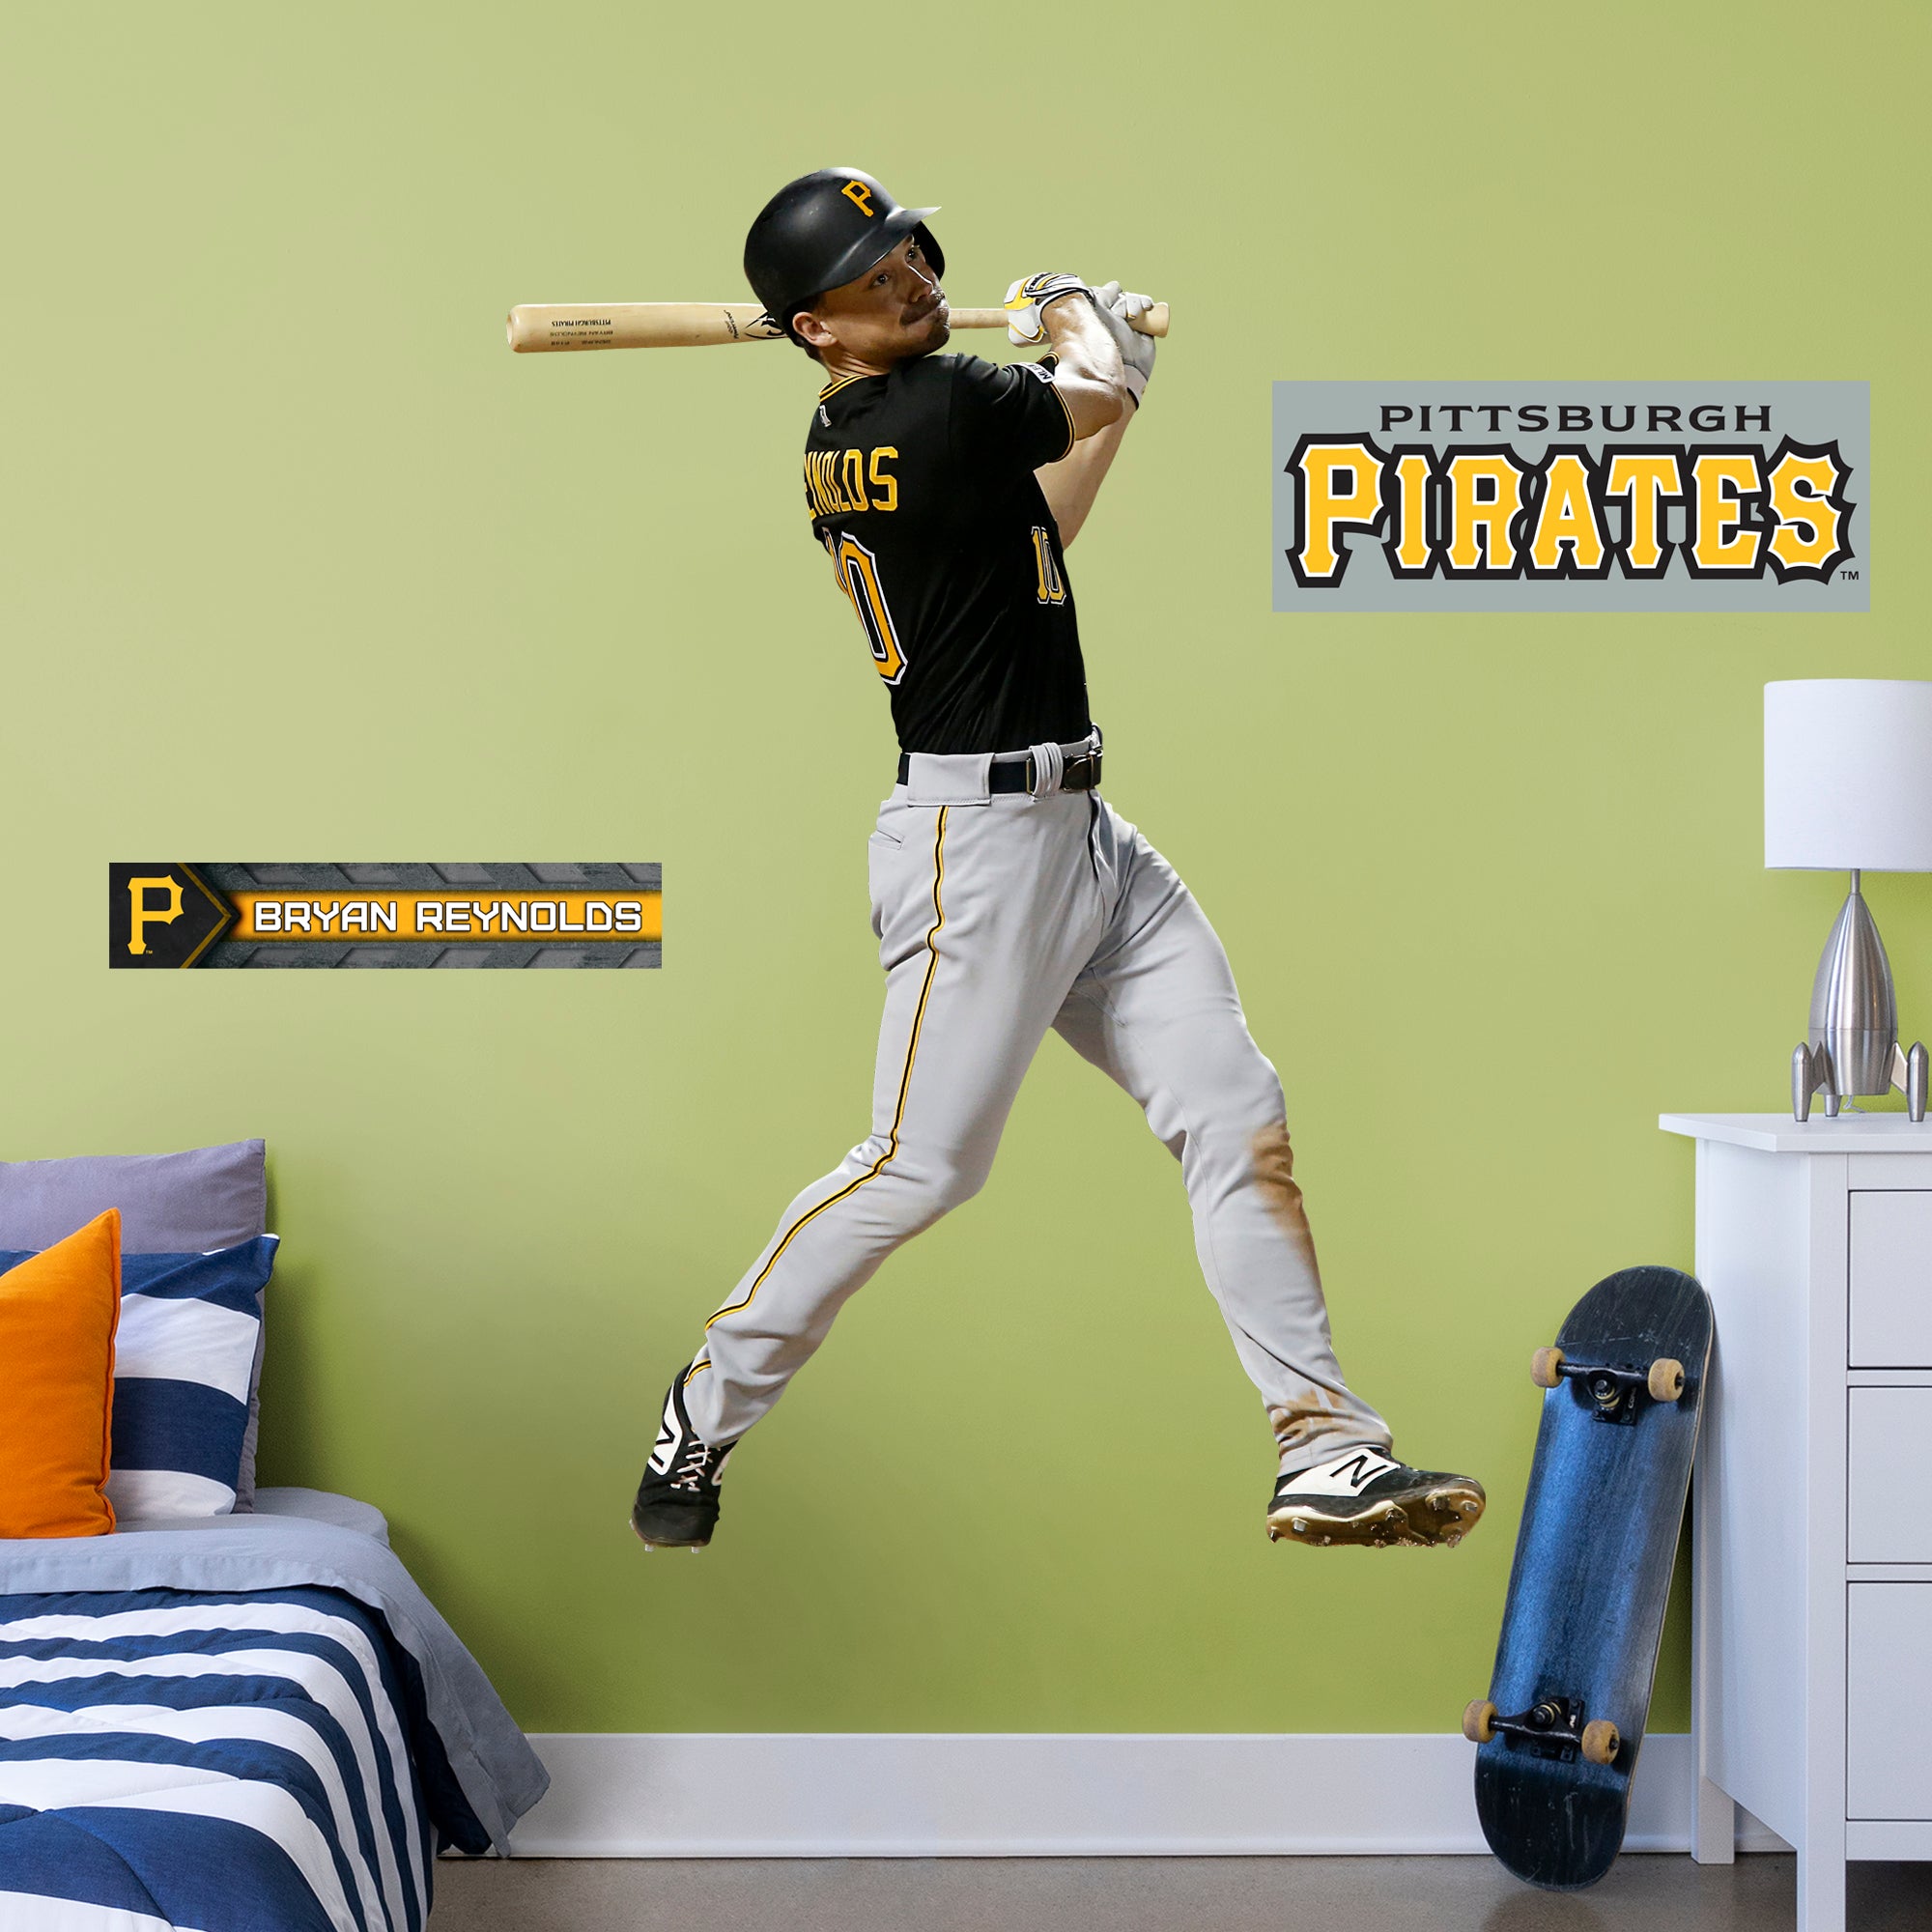 Bryan Reynolds for Pittsburgh Pirates - Officially Licensed MLB Removable Wall Decal Life-Size Athlete + 2 Decals by Fathead | V